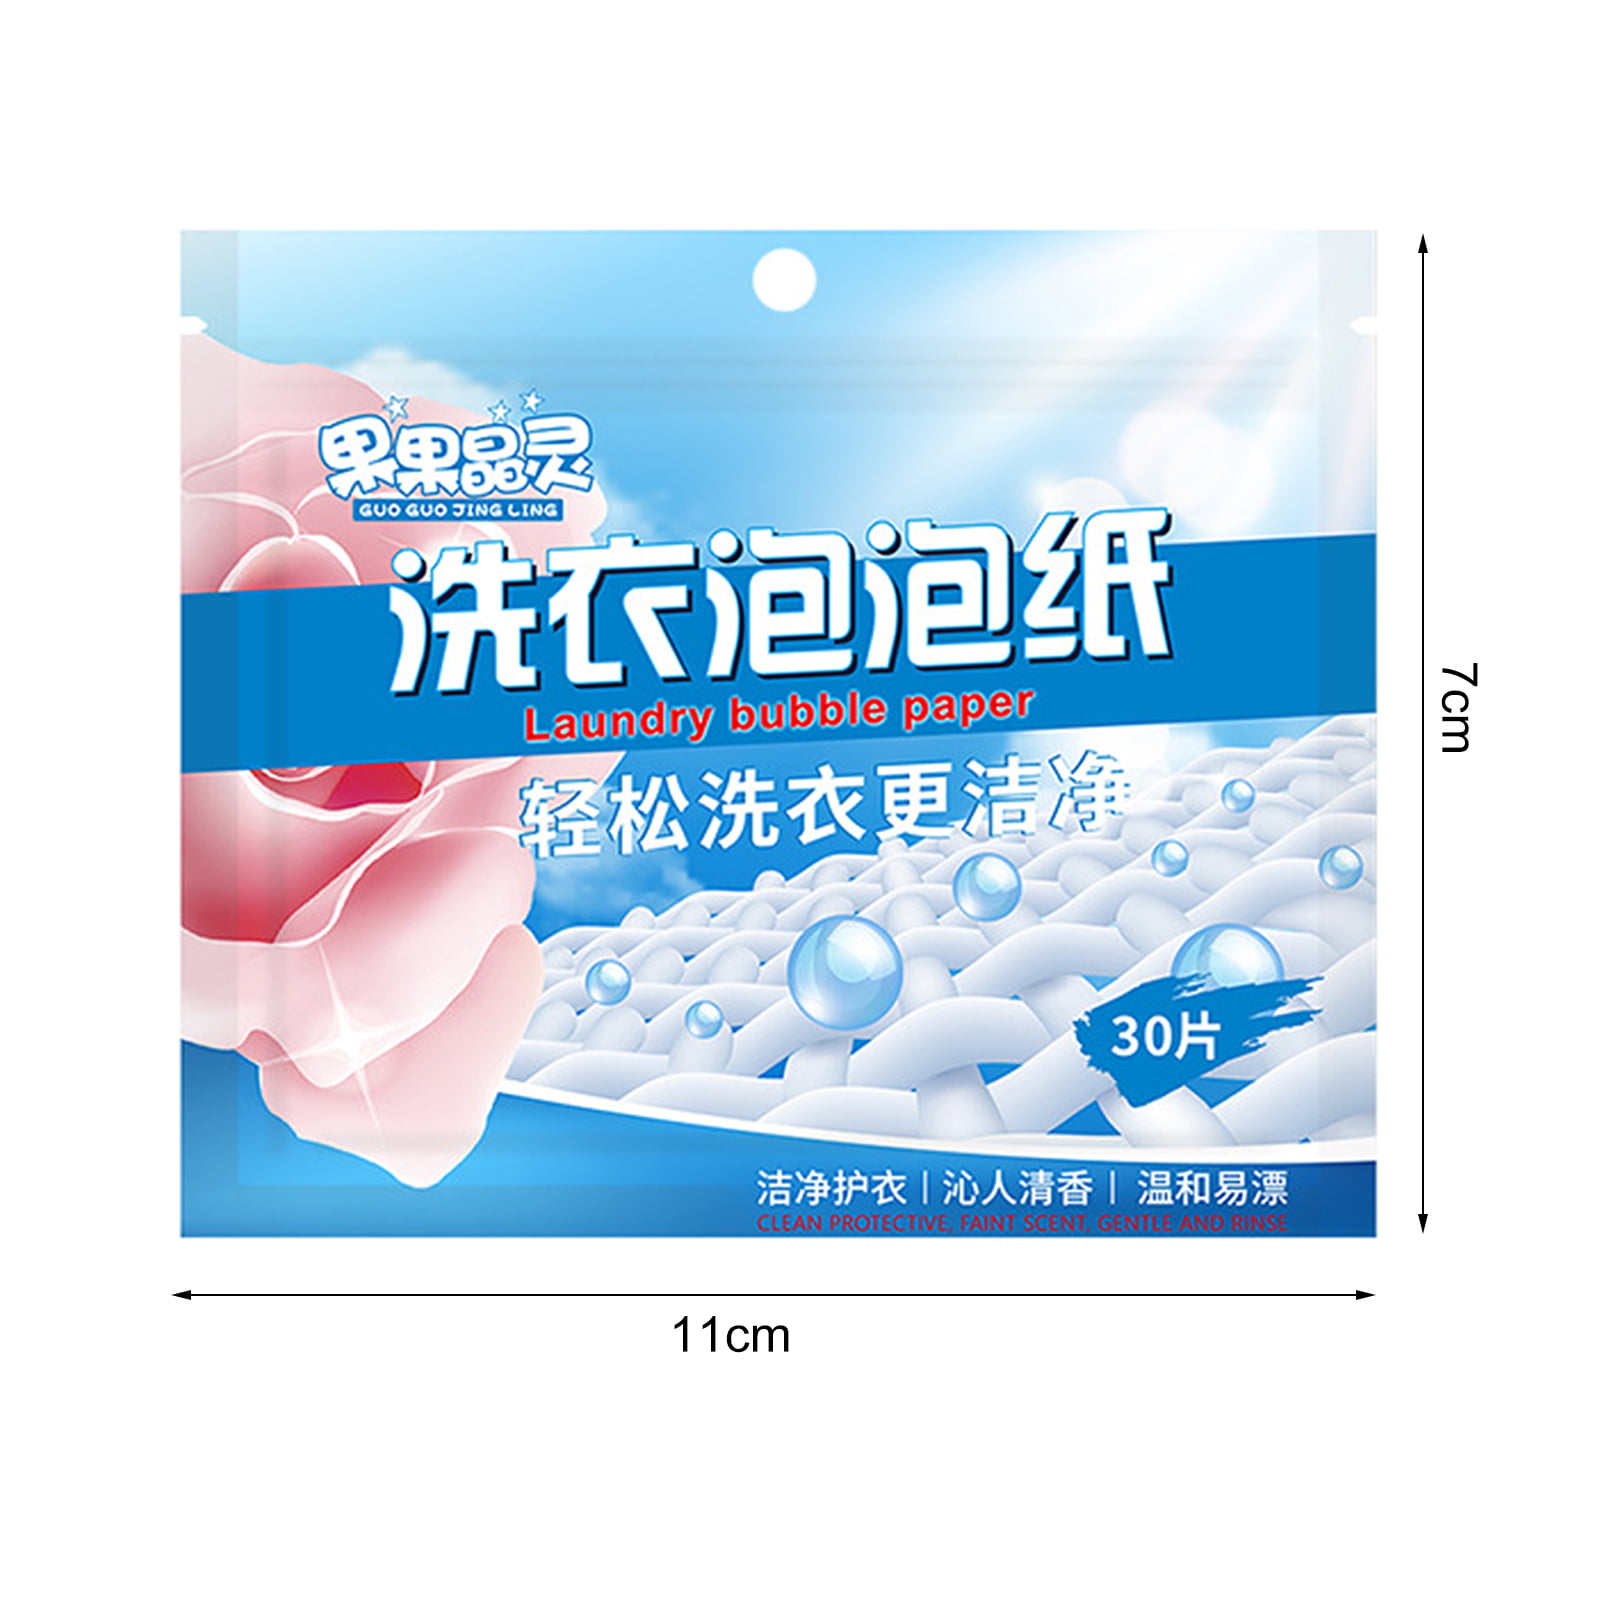 OLOEY Laundry Detergent Sheets 60PCS Washing Powder Paper With Fresh Scent  Clothes Washing Bubble Paper Portable Detergent Soap Paper